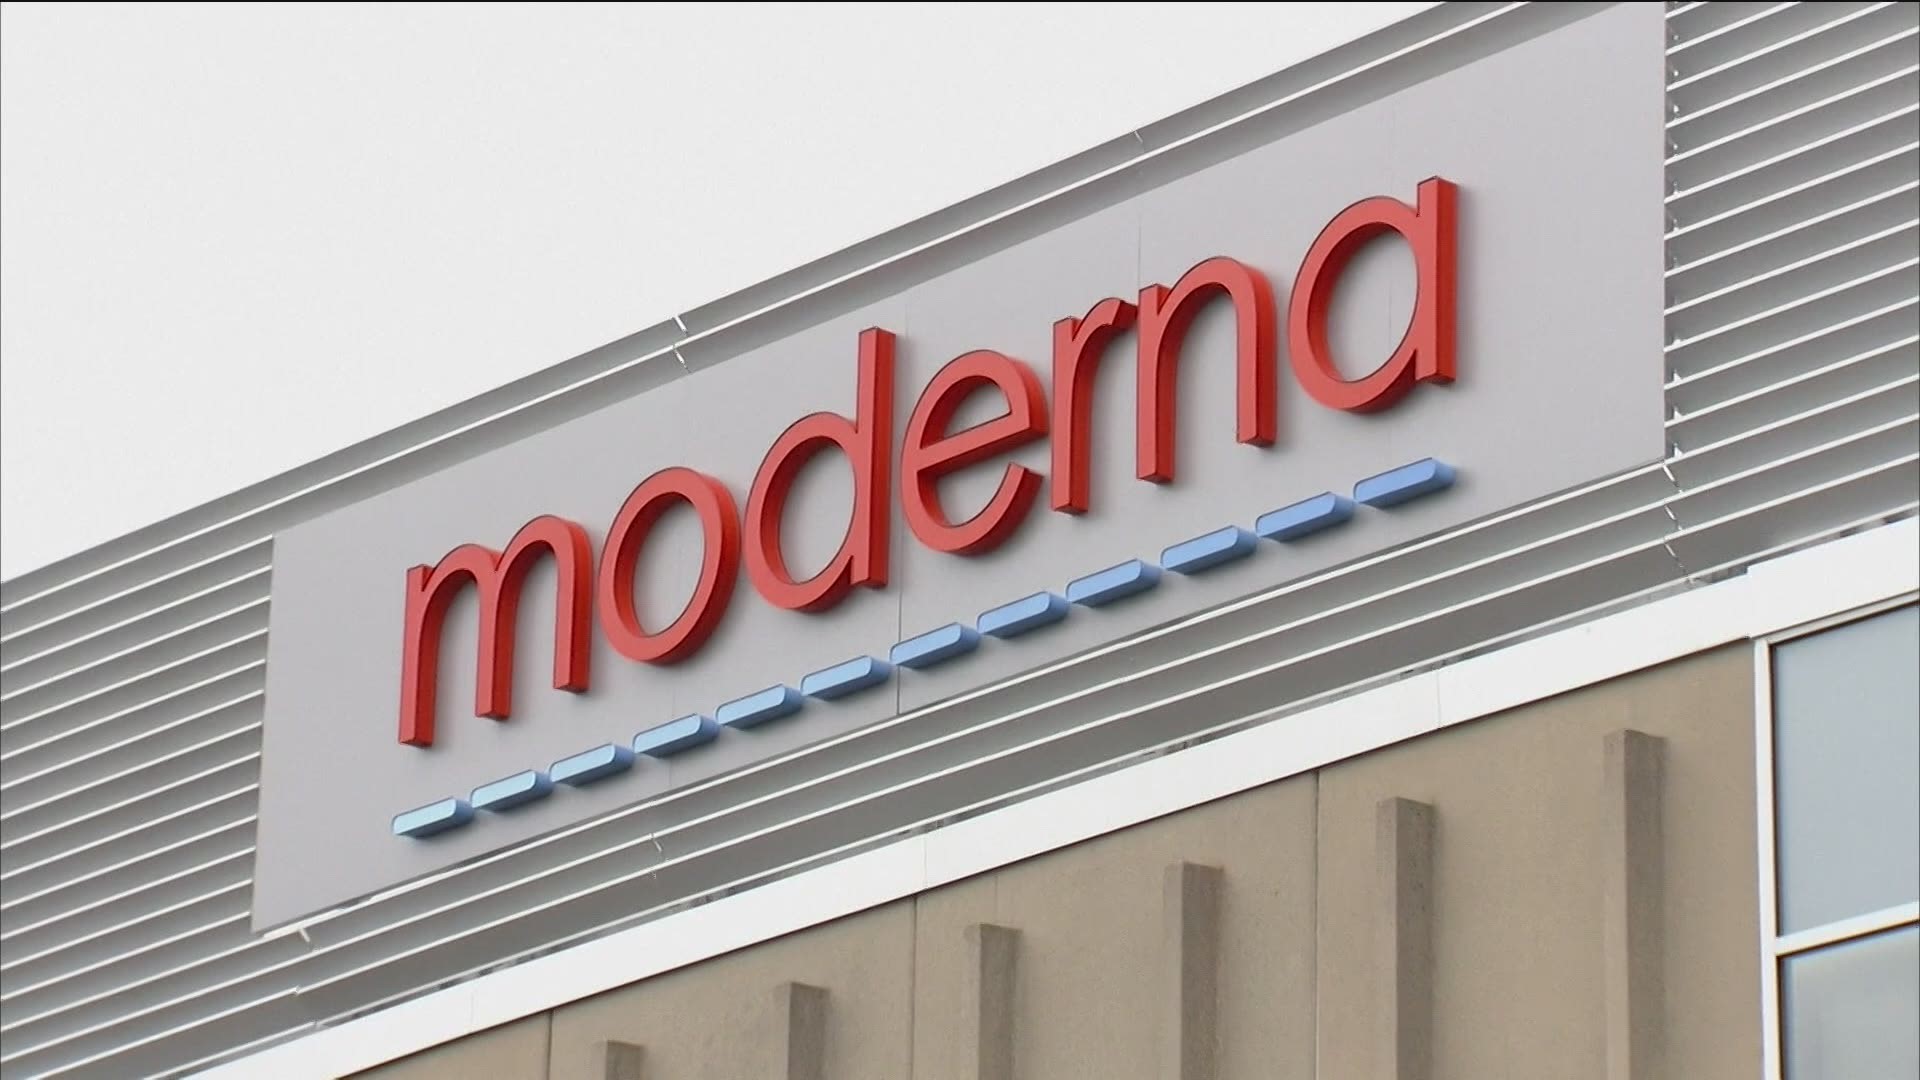 Moderna said no significant safety concerns were identified and the side effects were consistent with those seen in an earlier trial of adults.